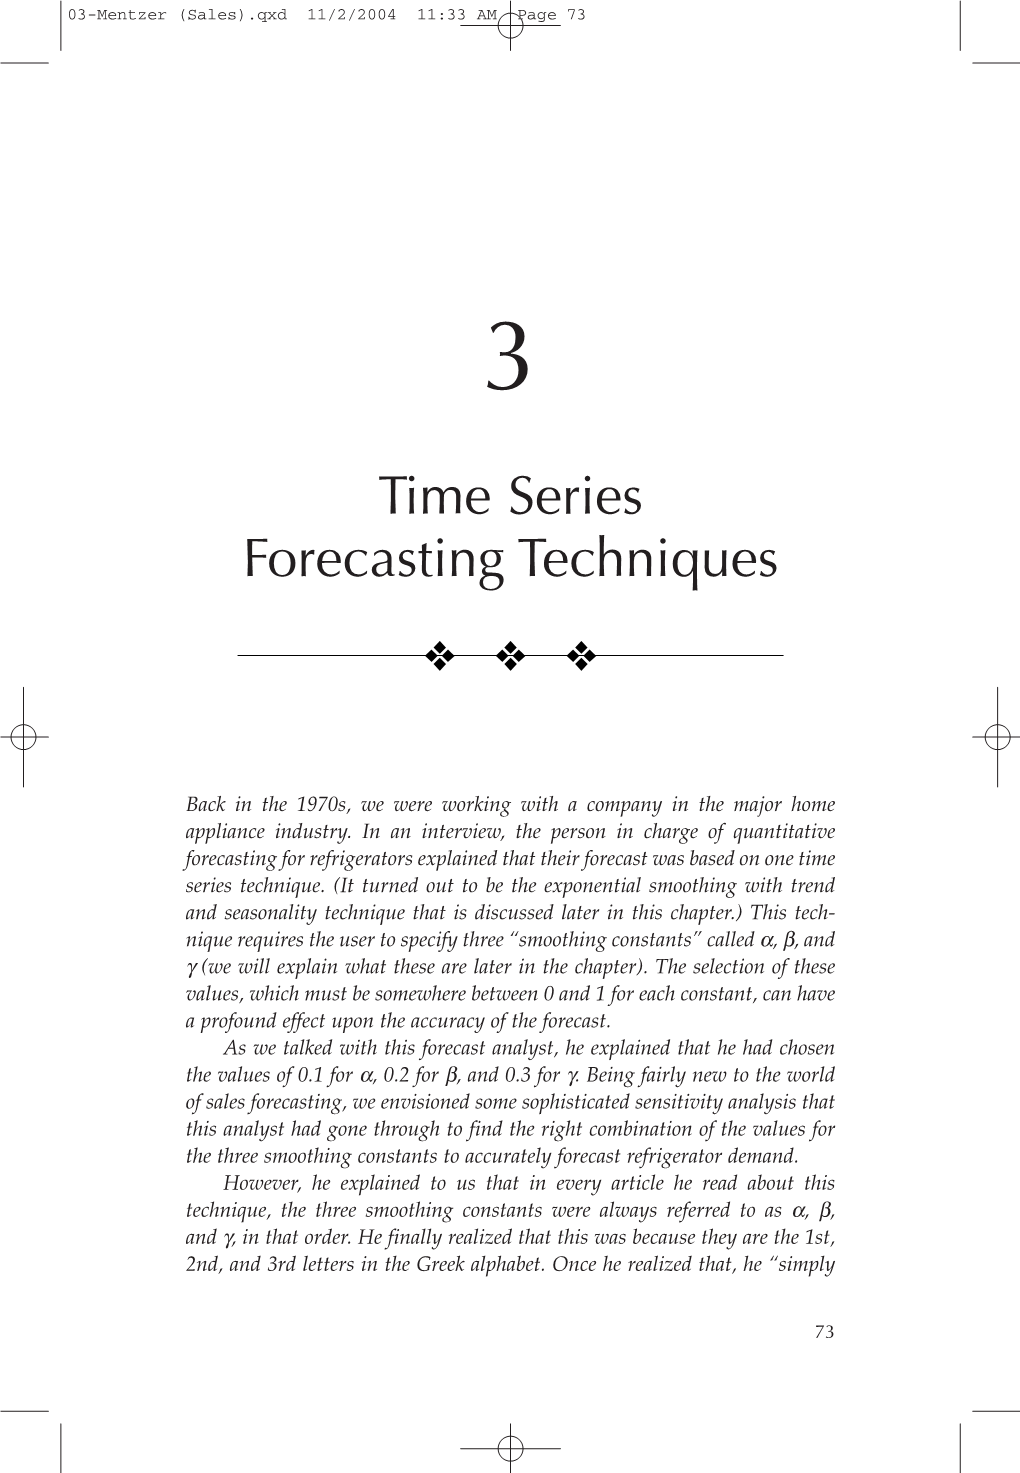 Chapter 3. Time Series Forecasting Techniques